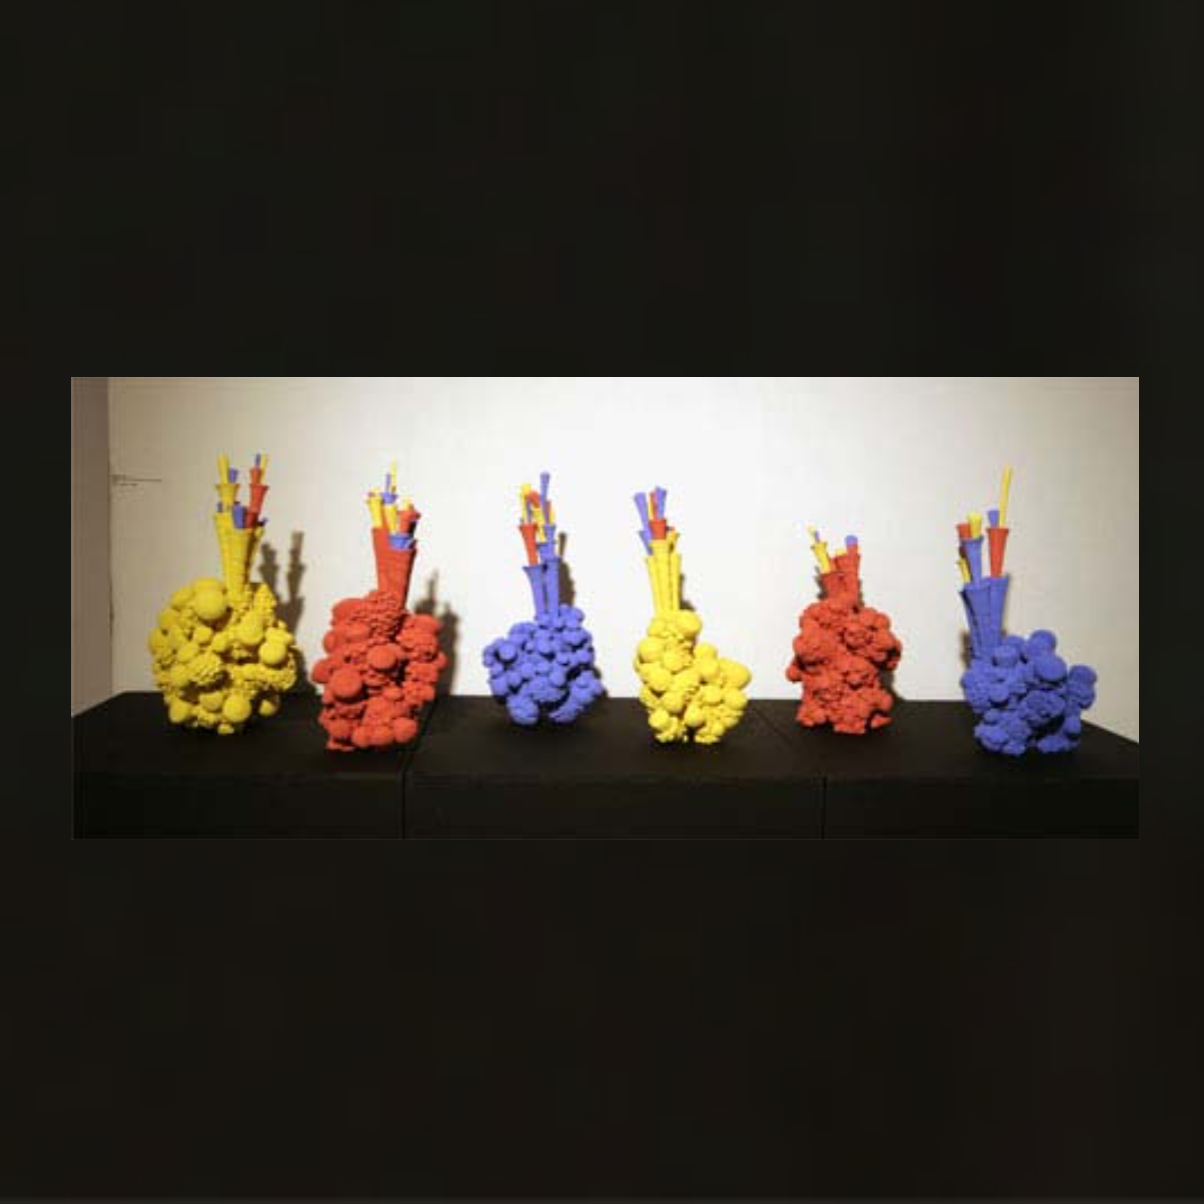 Three sculptures in shapes resembling test tubes. The surface of these sculptures in textured and bubbly. They are painted one red, one blue, and one yellow